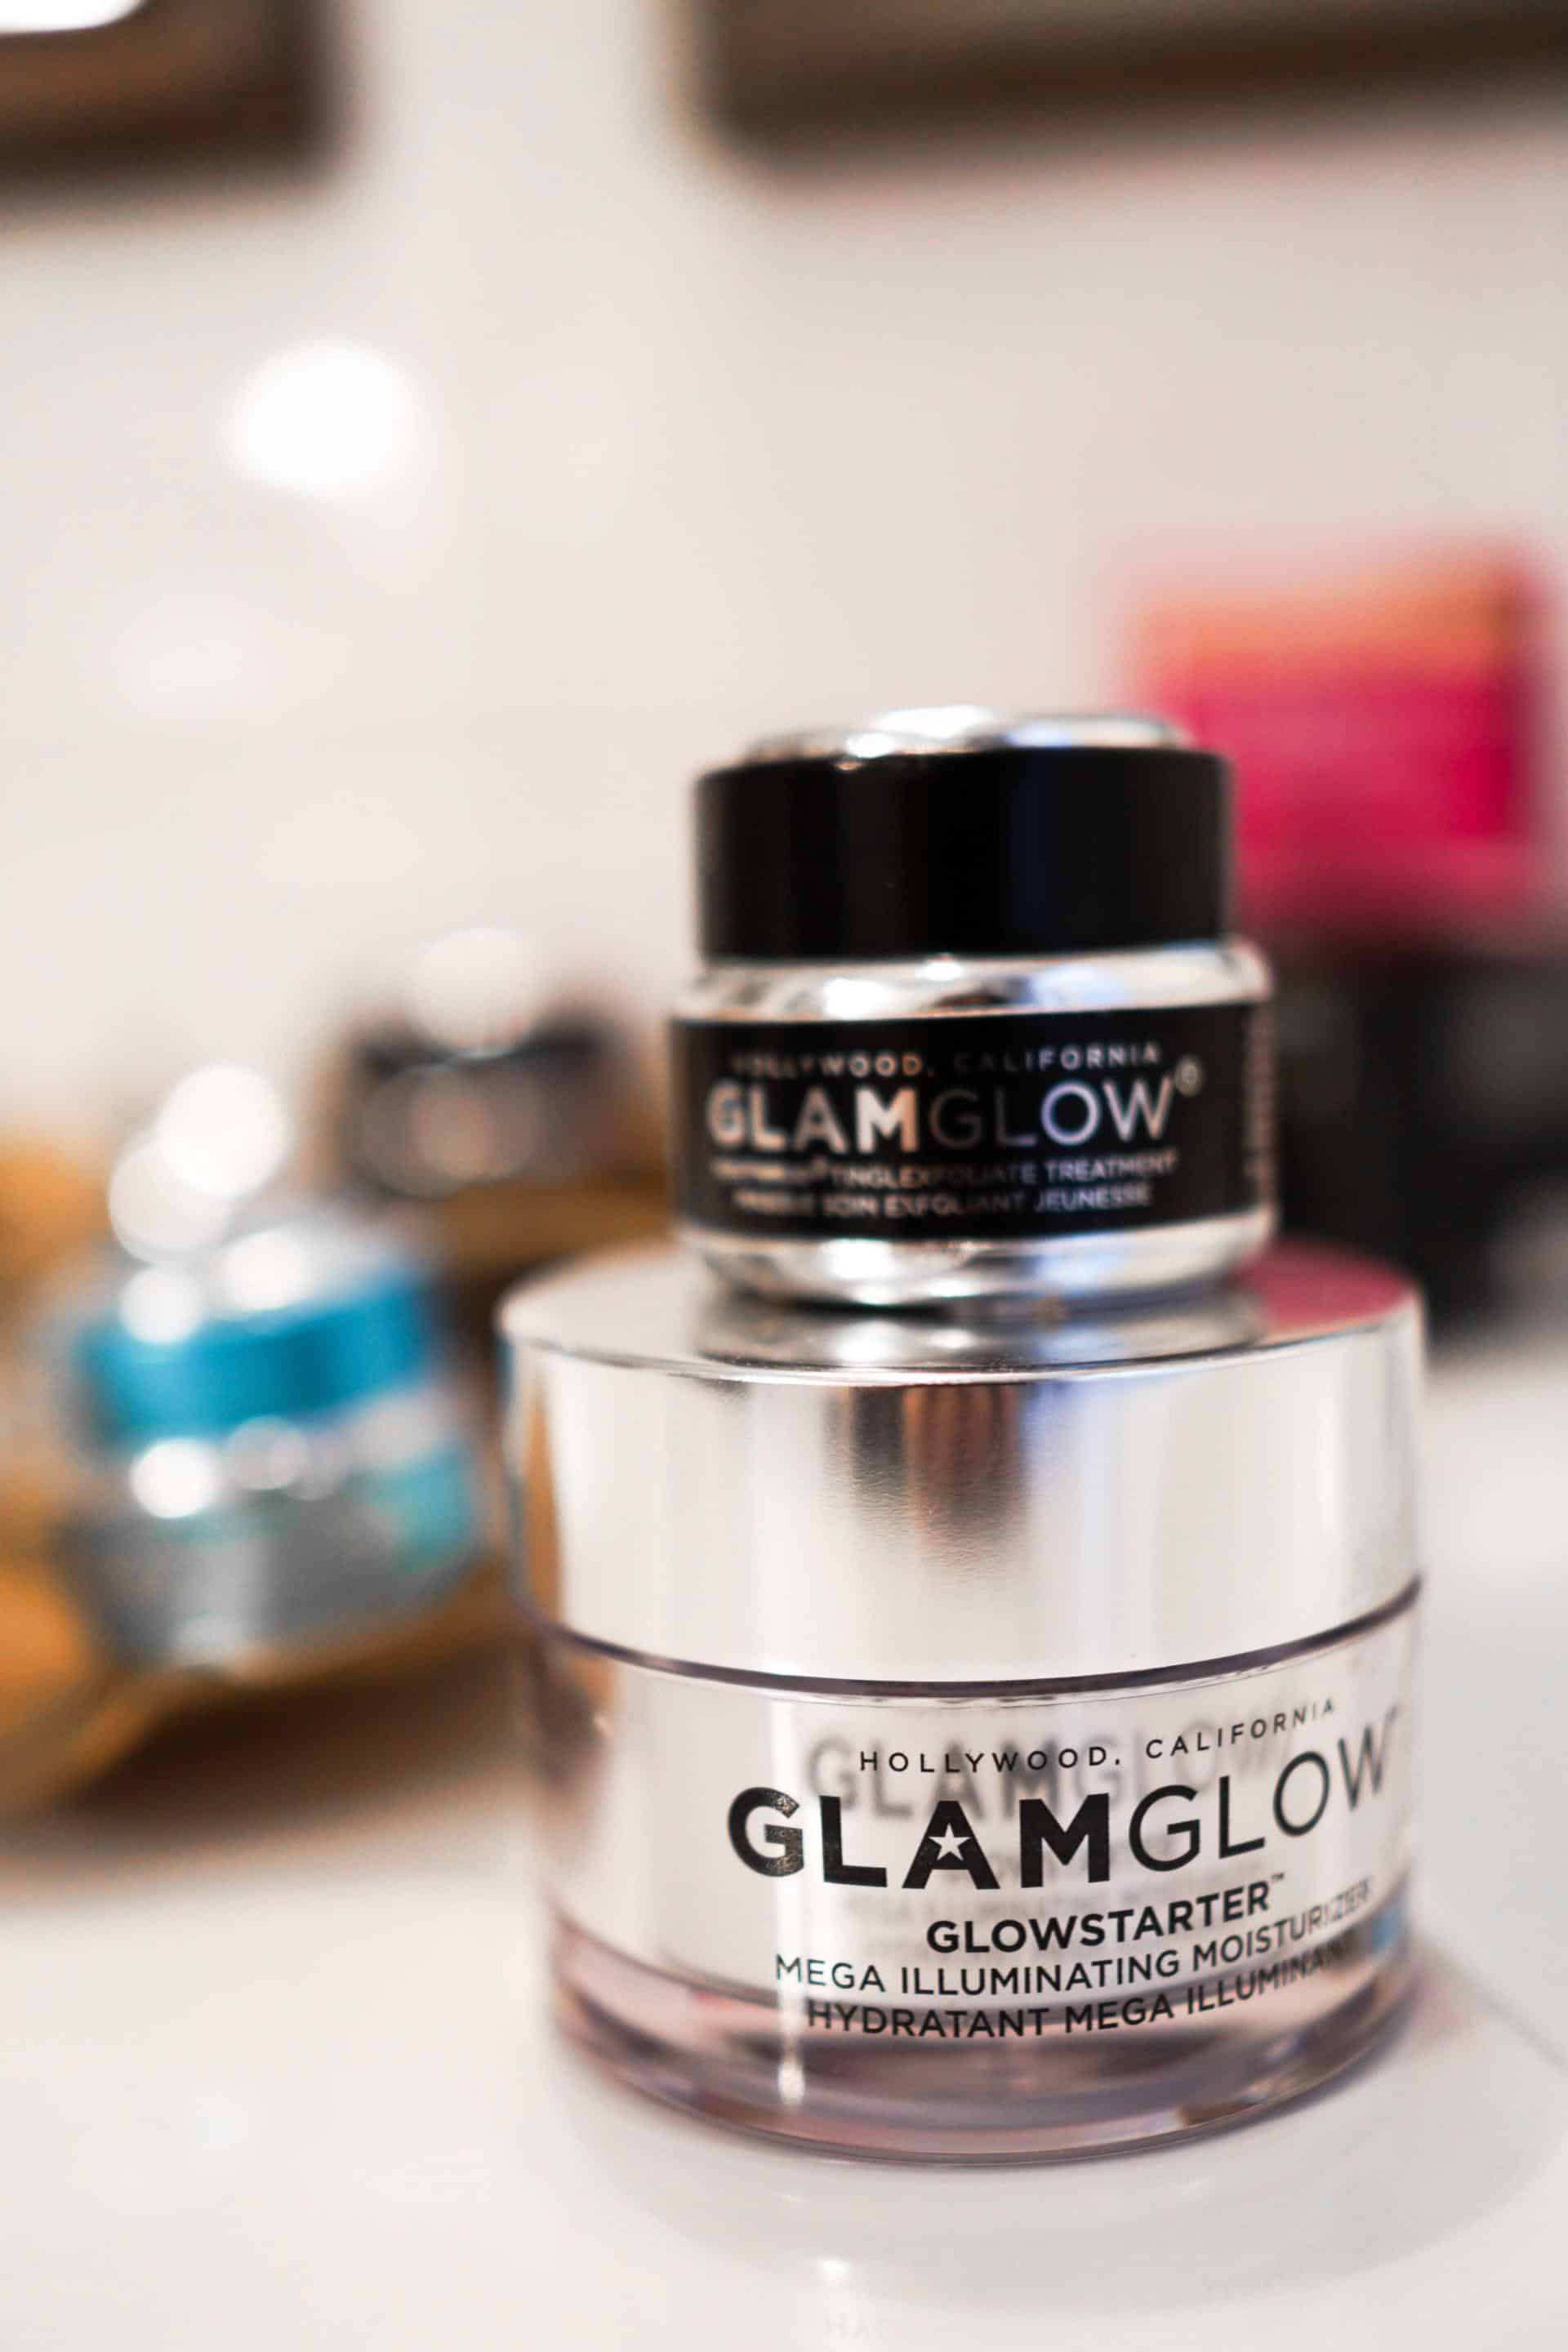 glamglow mini size compared to regular size